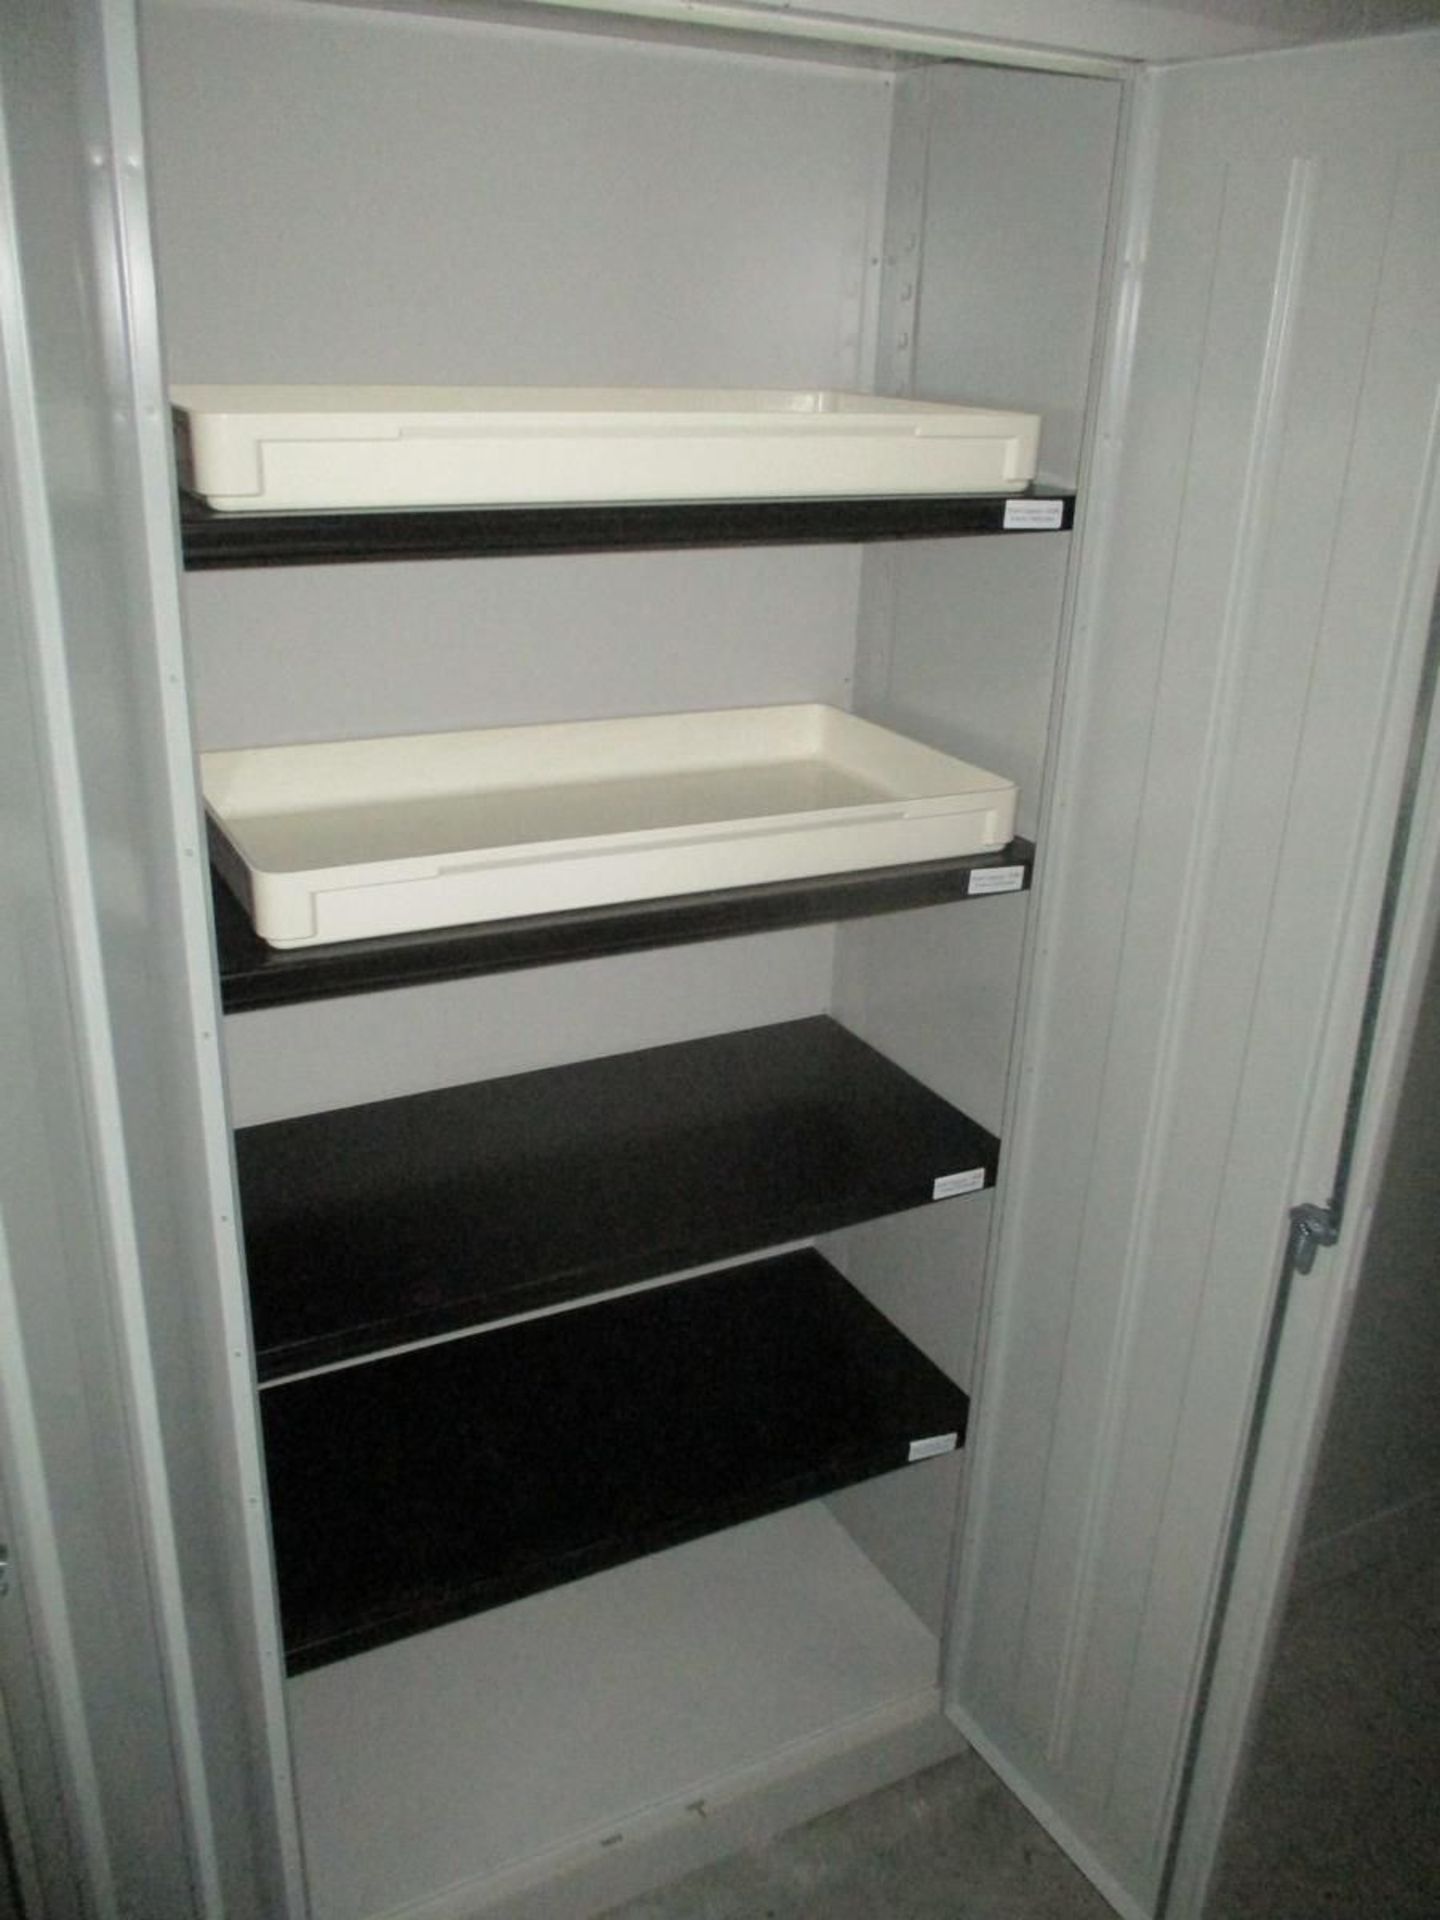 36"" W x 18"" D x 78"" H Steel Storage Cabinets - Image 5 of 8